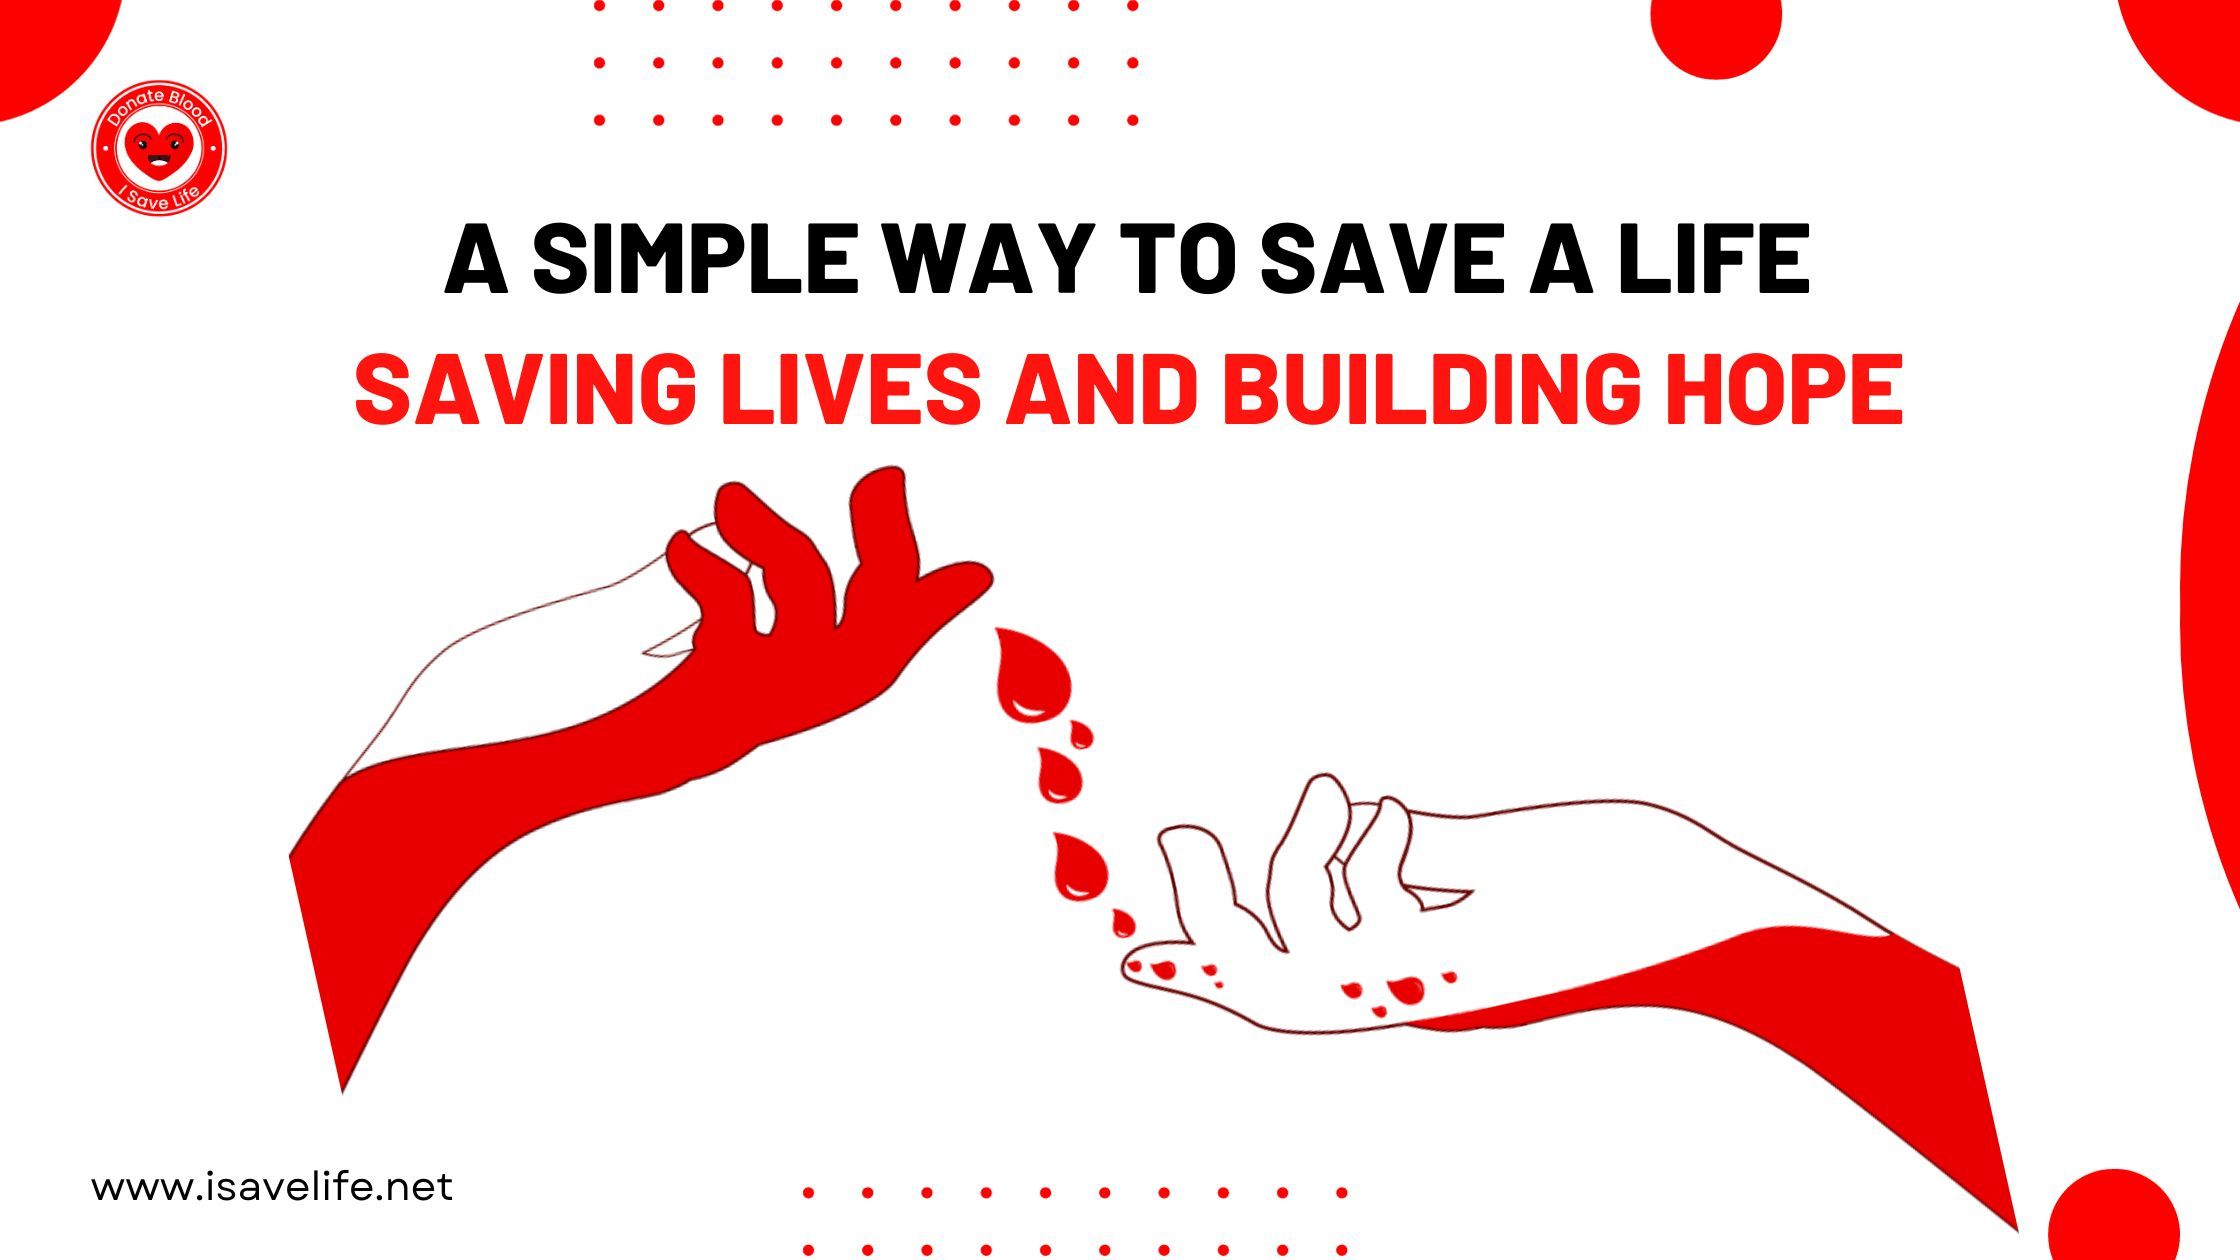 A Simple Way to Save a Life: Saving Lives and Building Hope